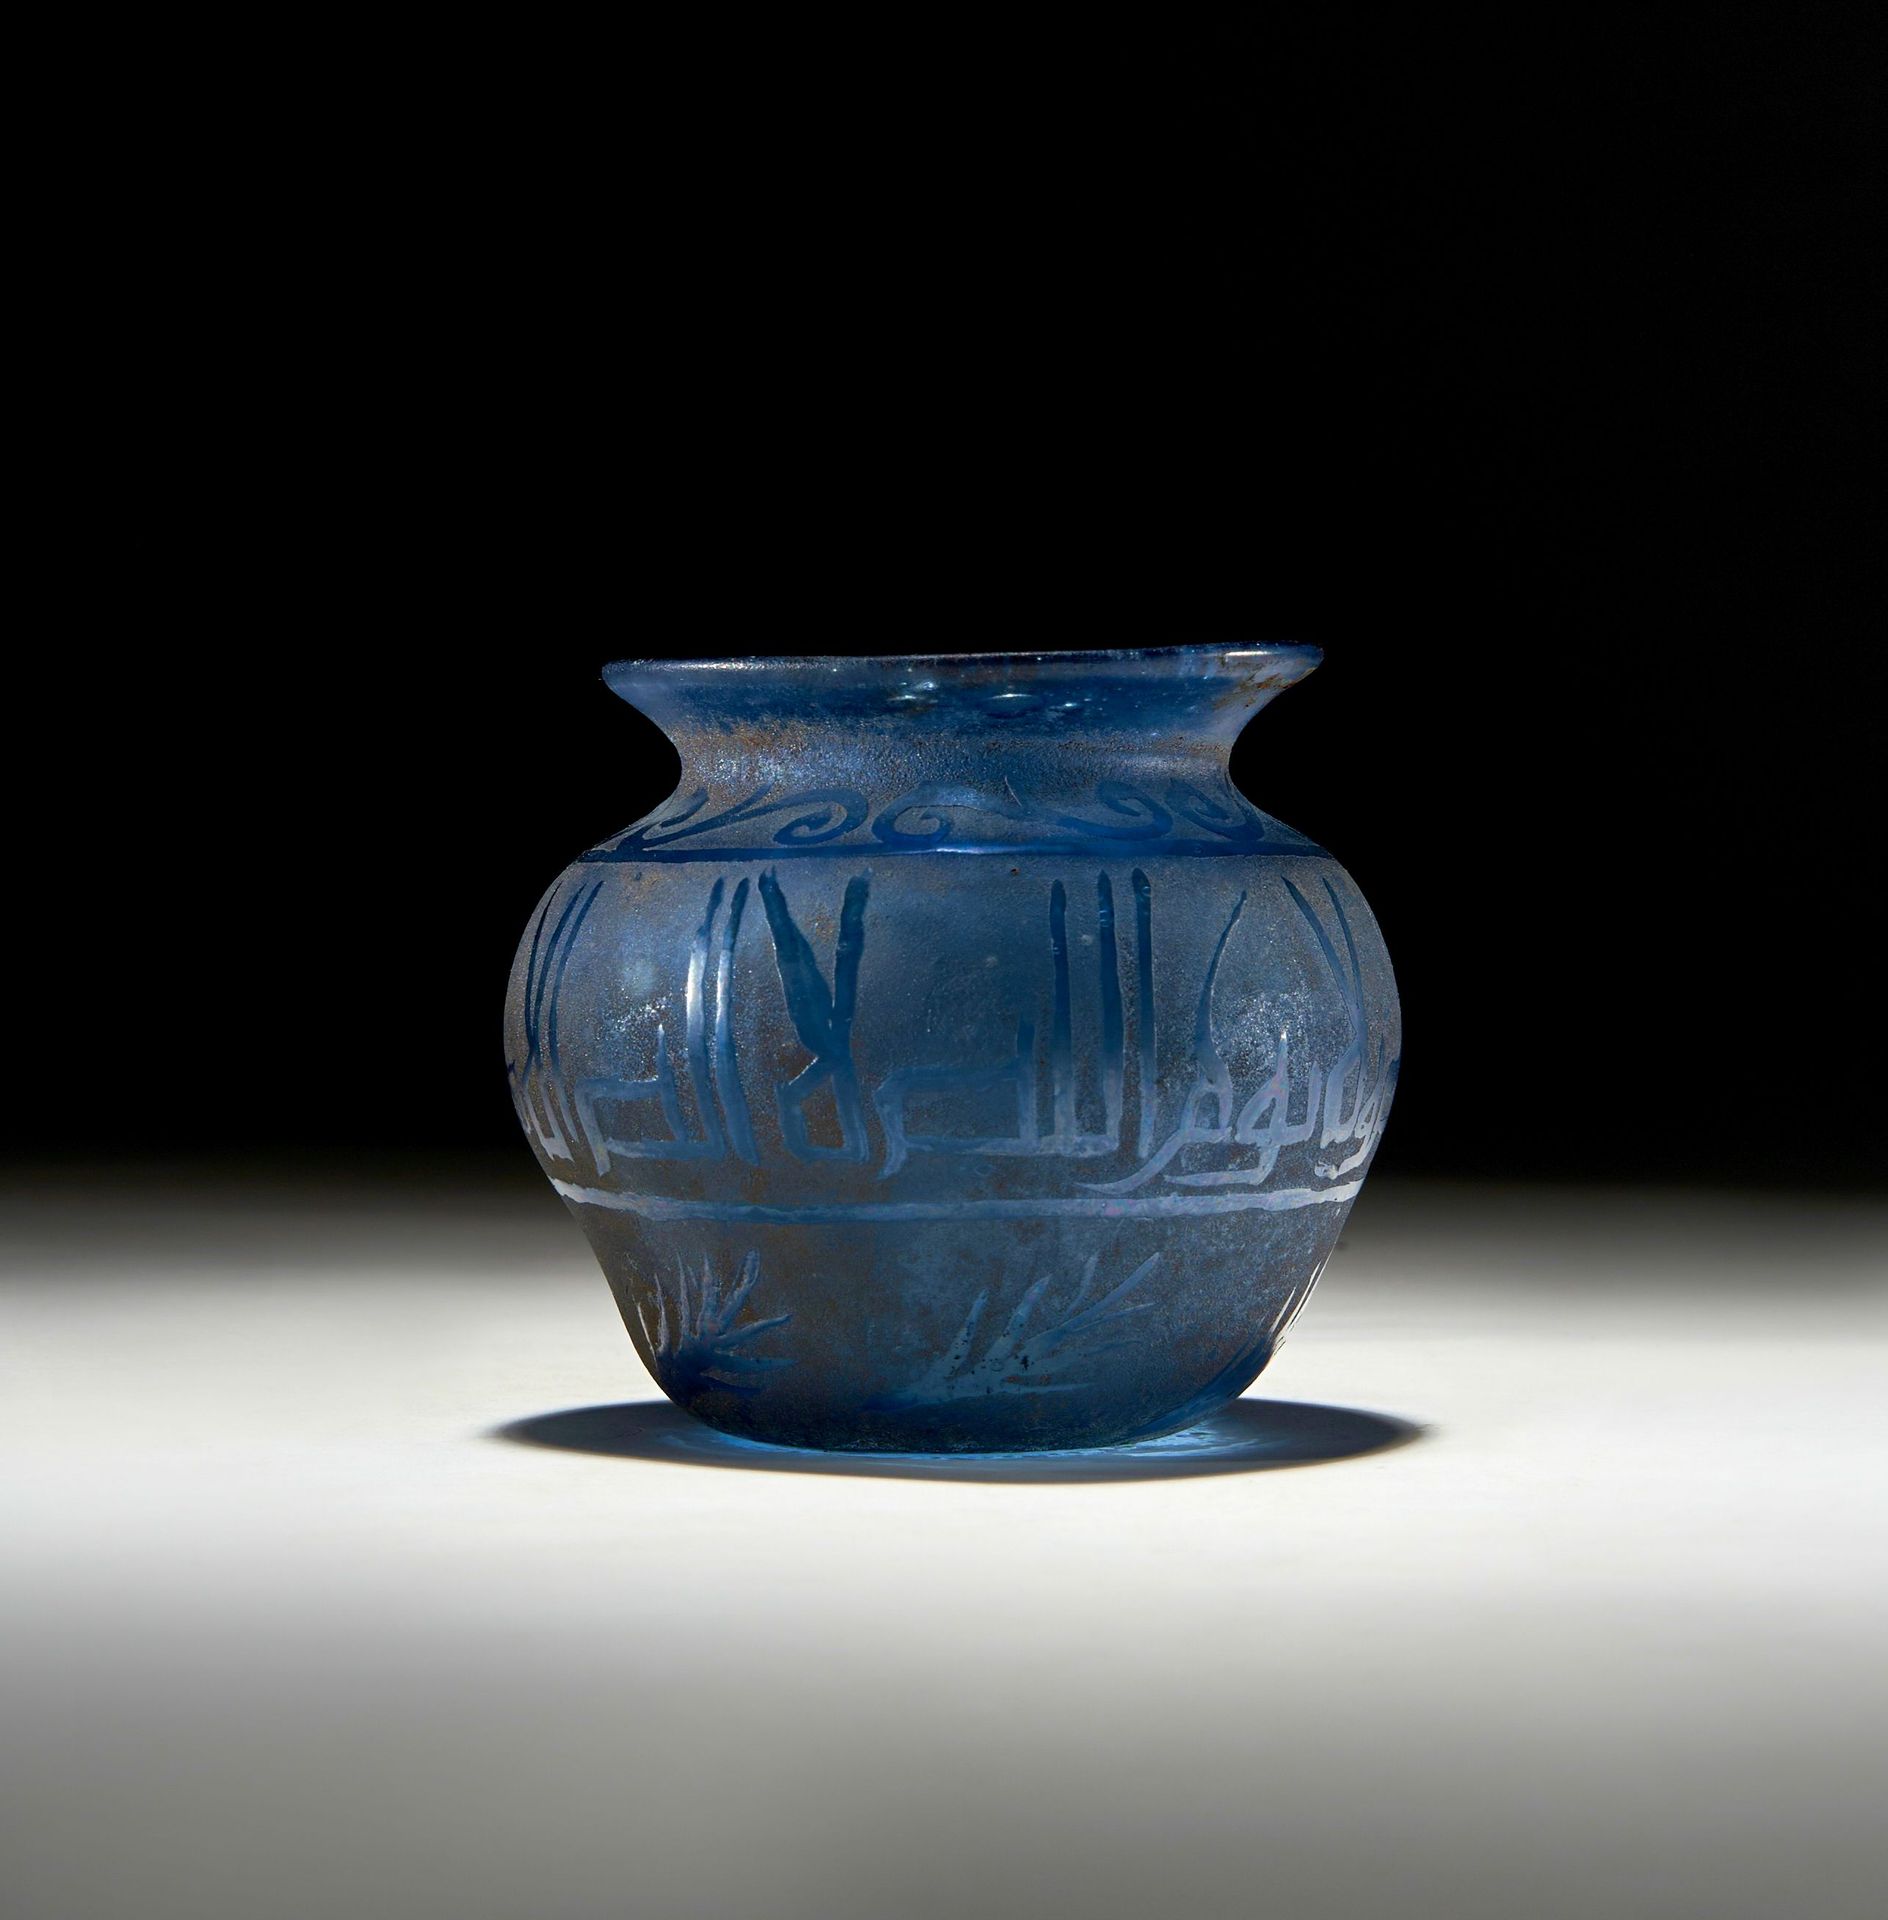 A KUFIC INSCRIBED BLUE GLASS POT, PROBABLY 9TH-11TH CENTURY A.D. 铭文蓝玻璃壶，可能是公元9-1&hellip;